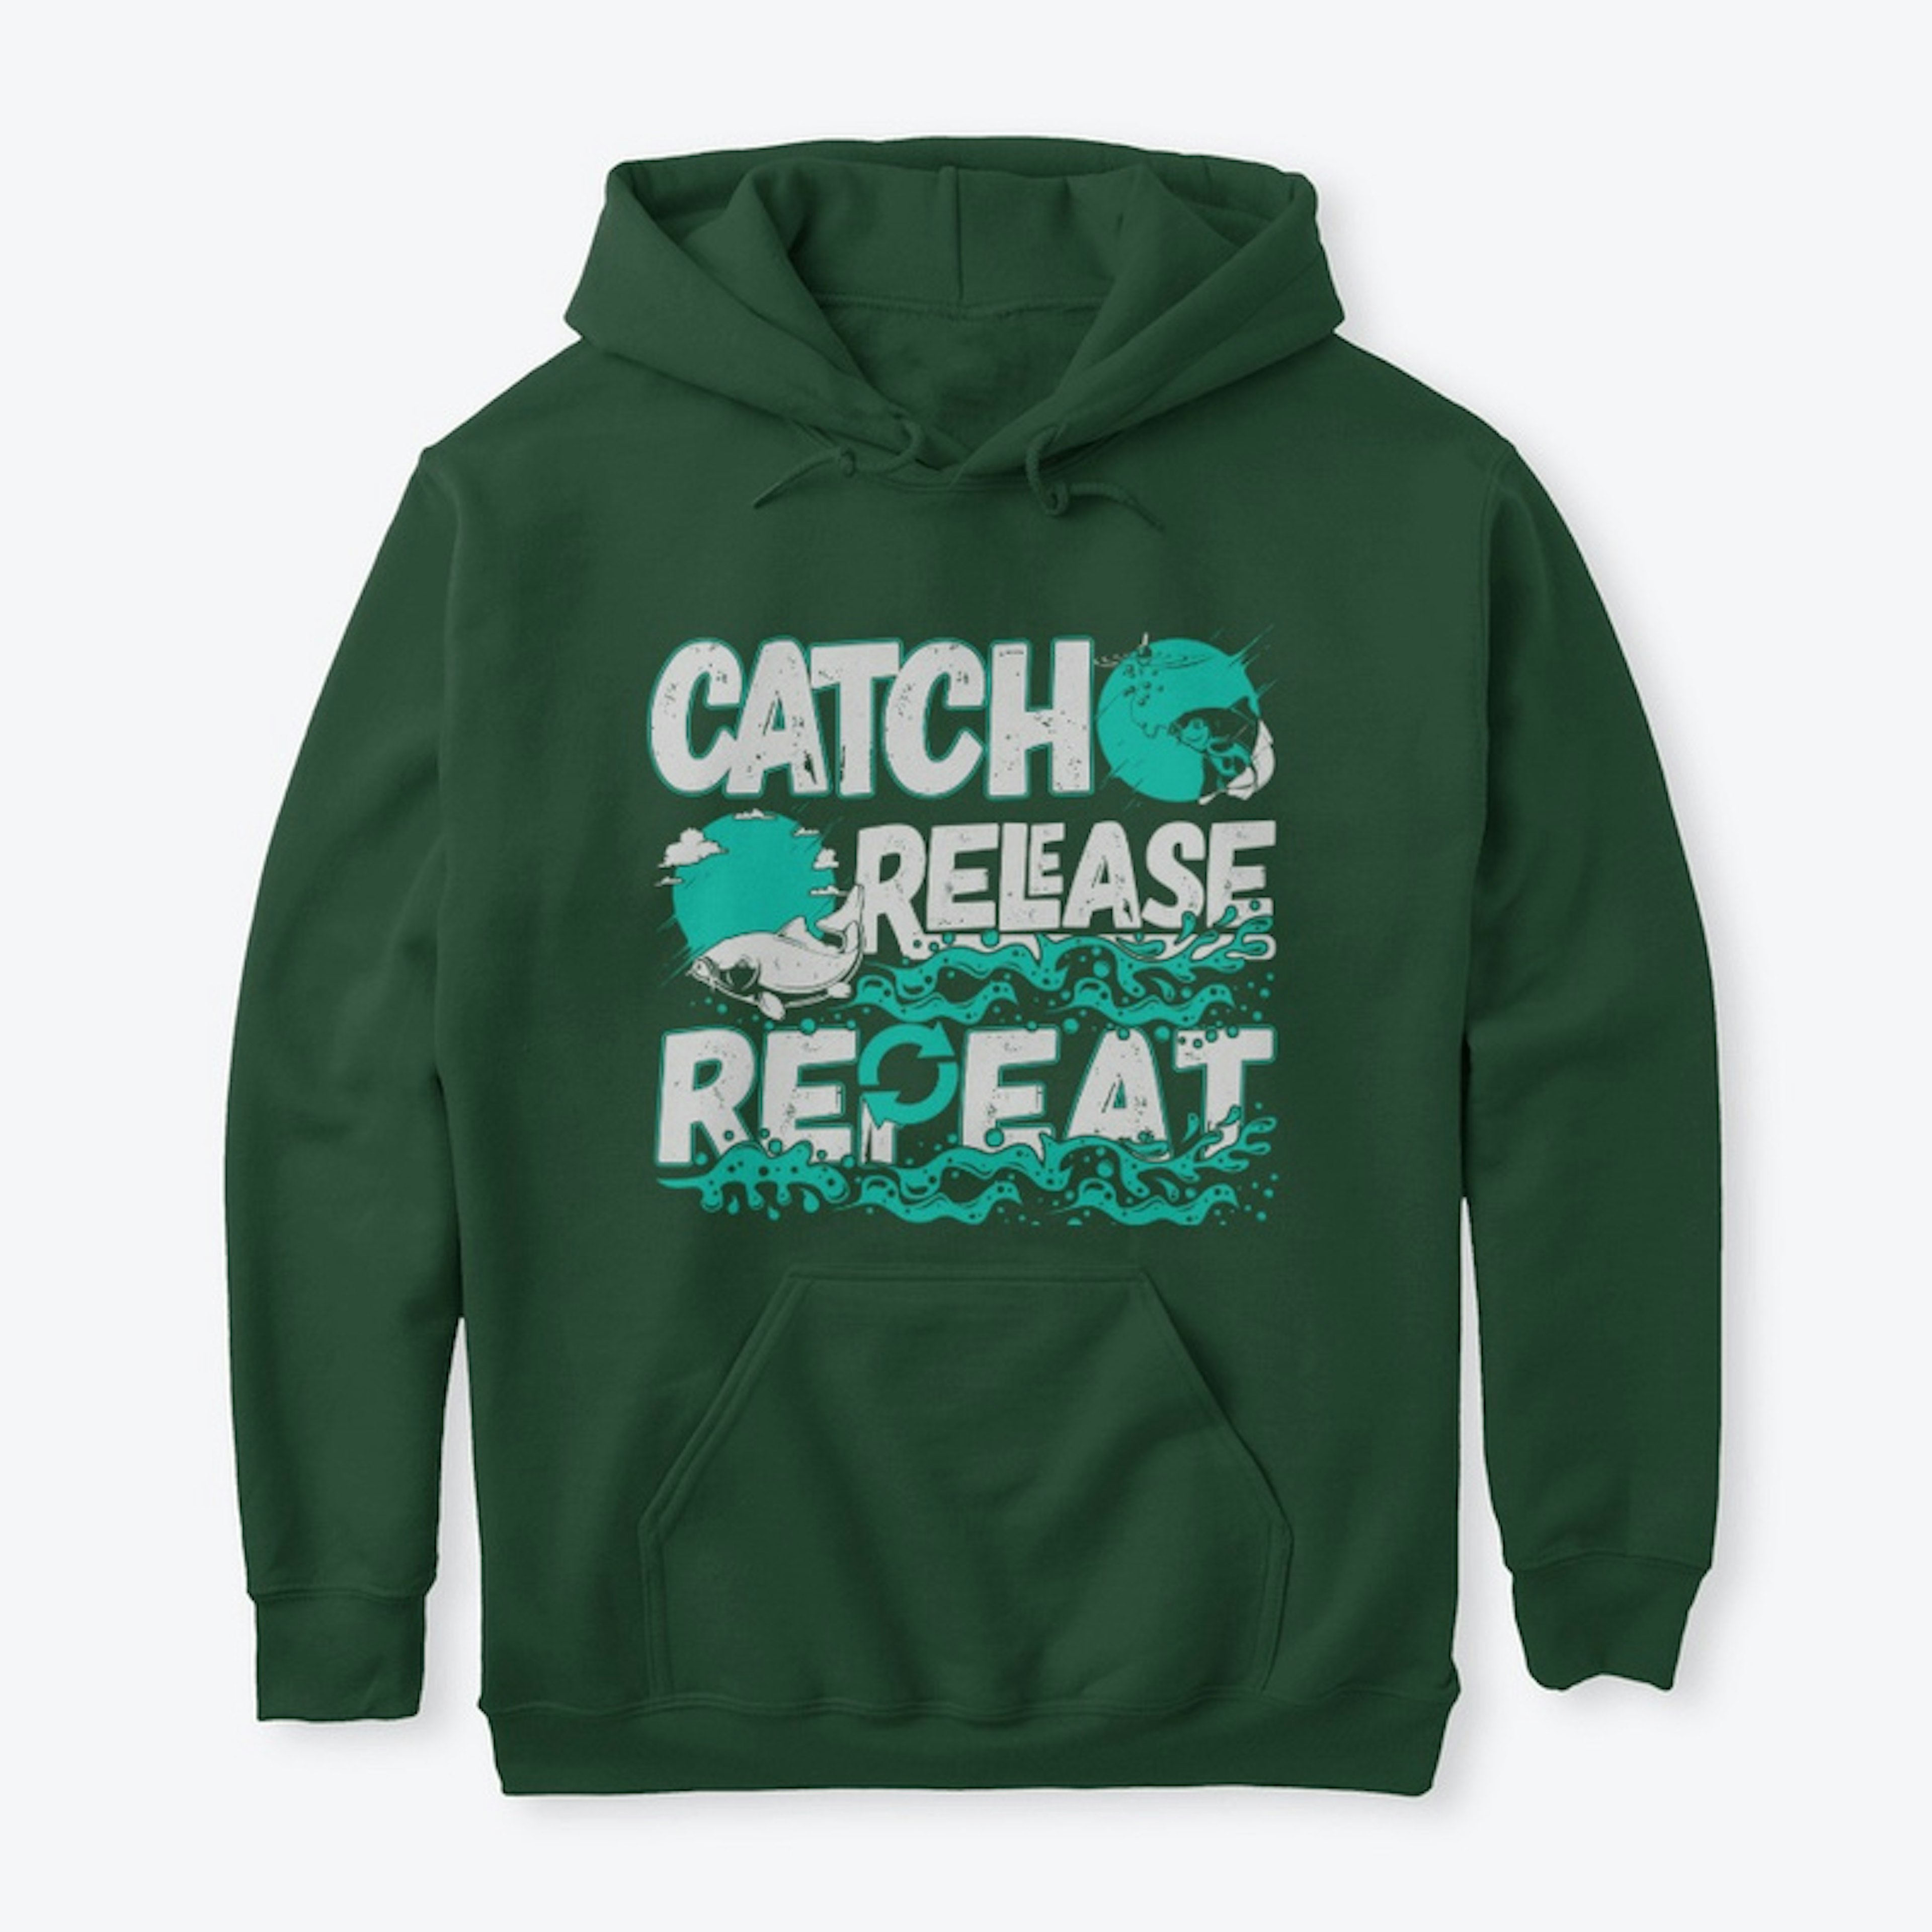 Fishing Shirt - Catch and Release